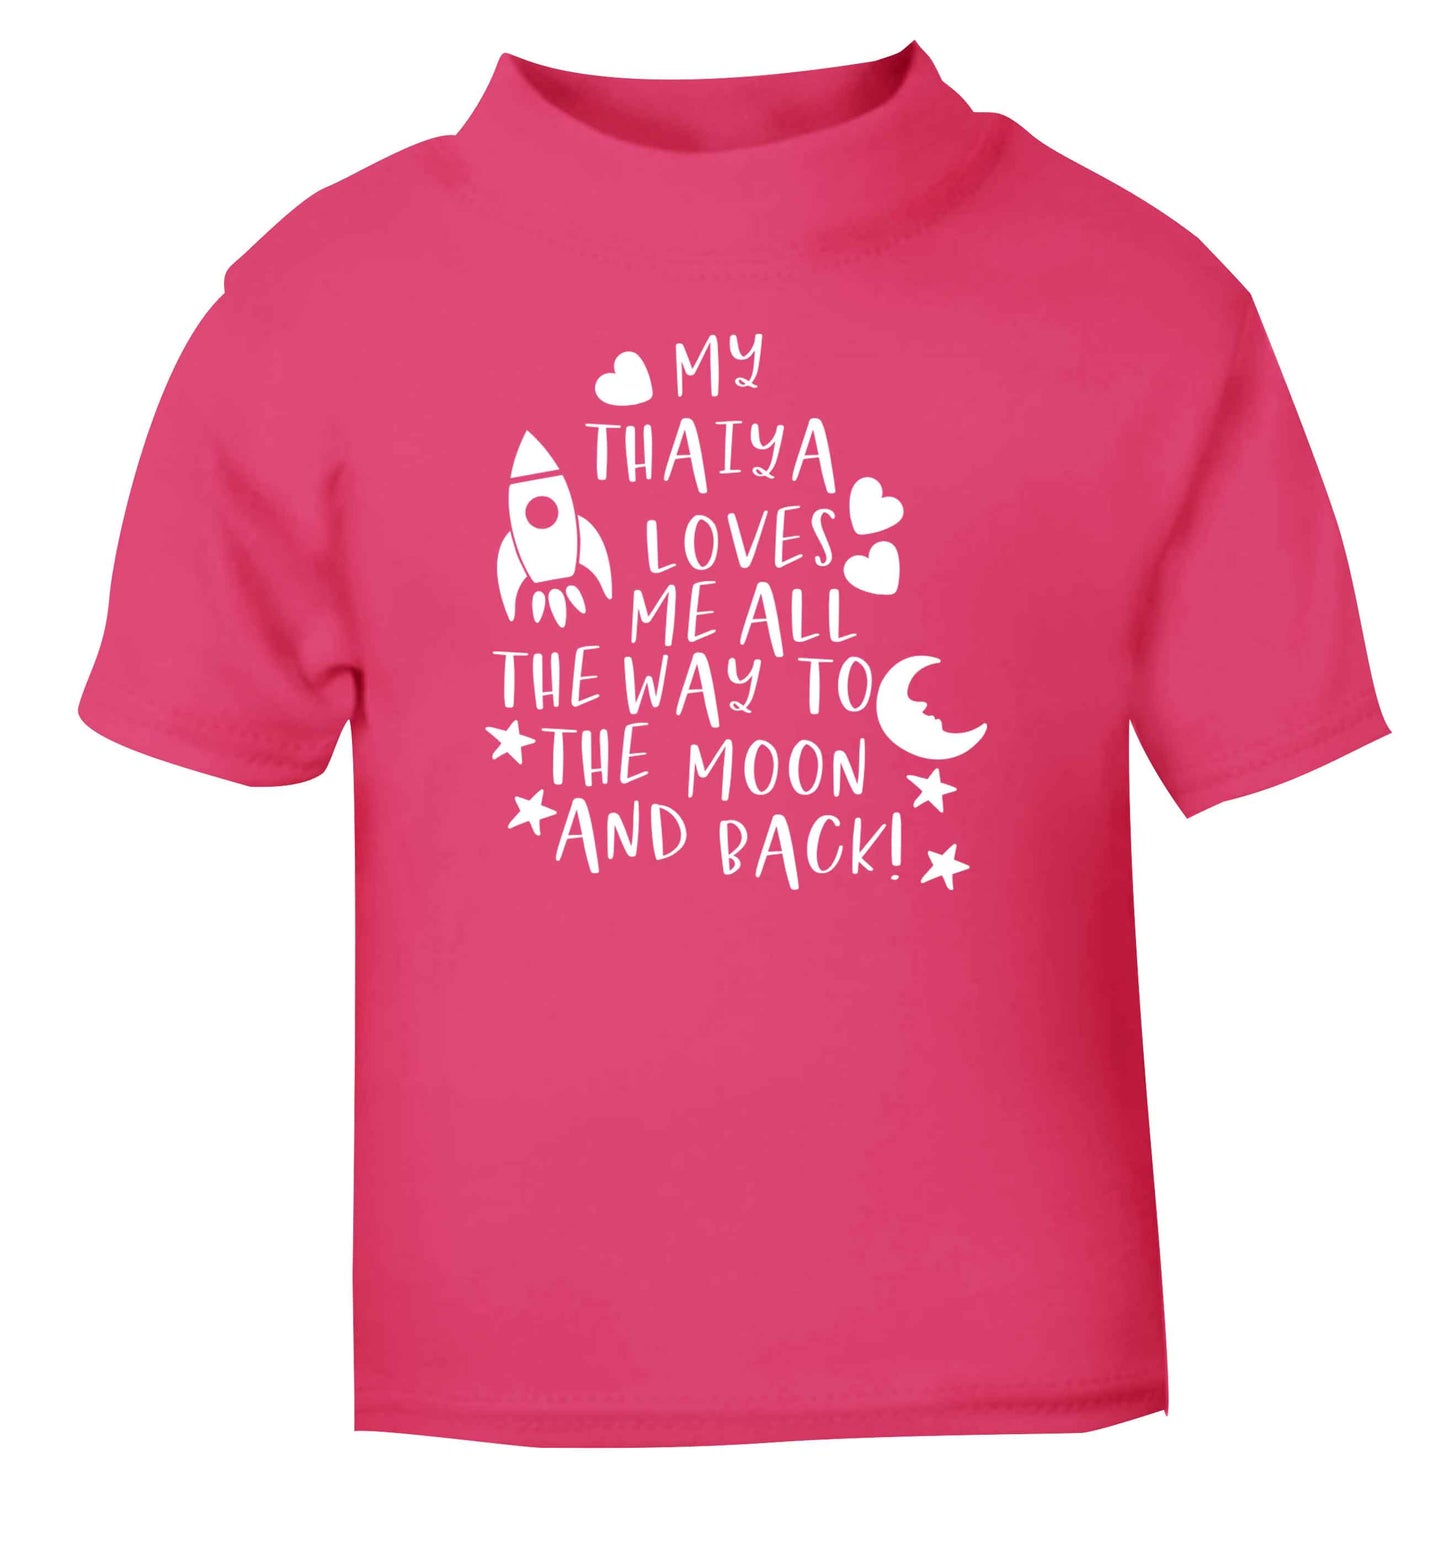 My thaiya loves me all the way to the moon and back pink Baby Toddler Tshirt 2 Years